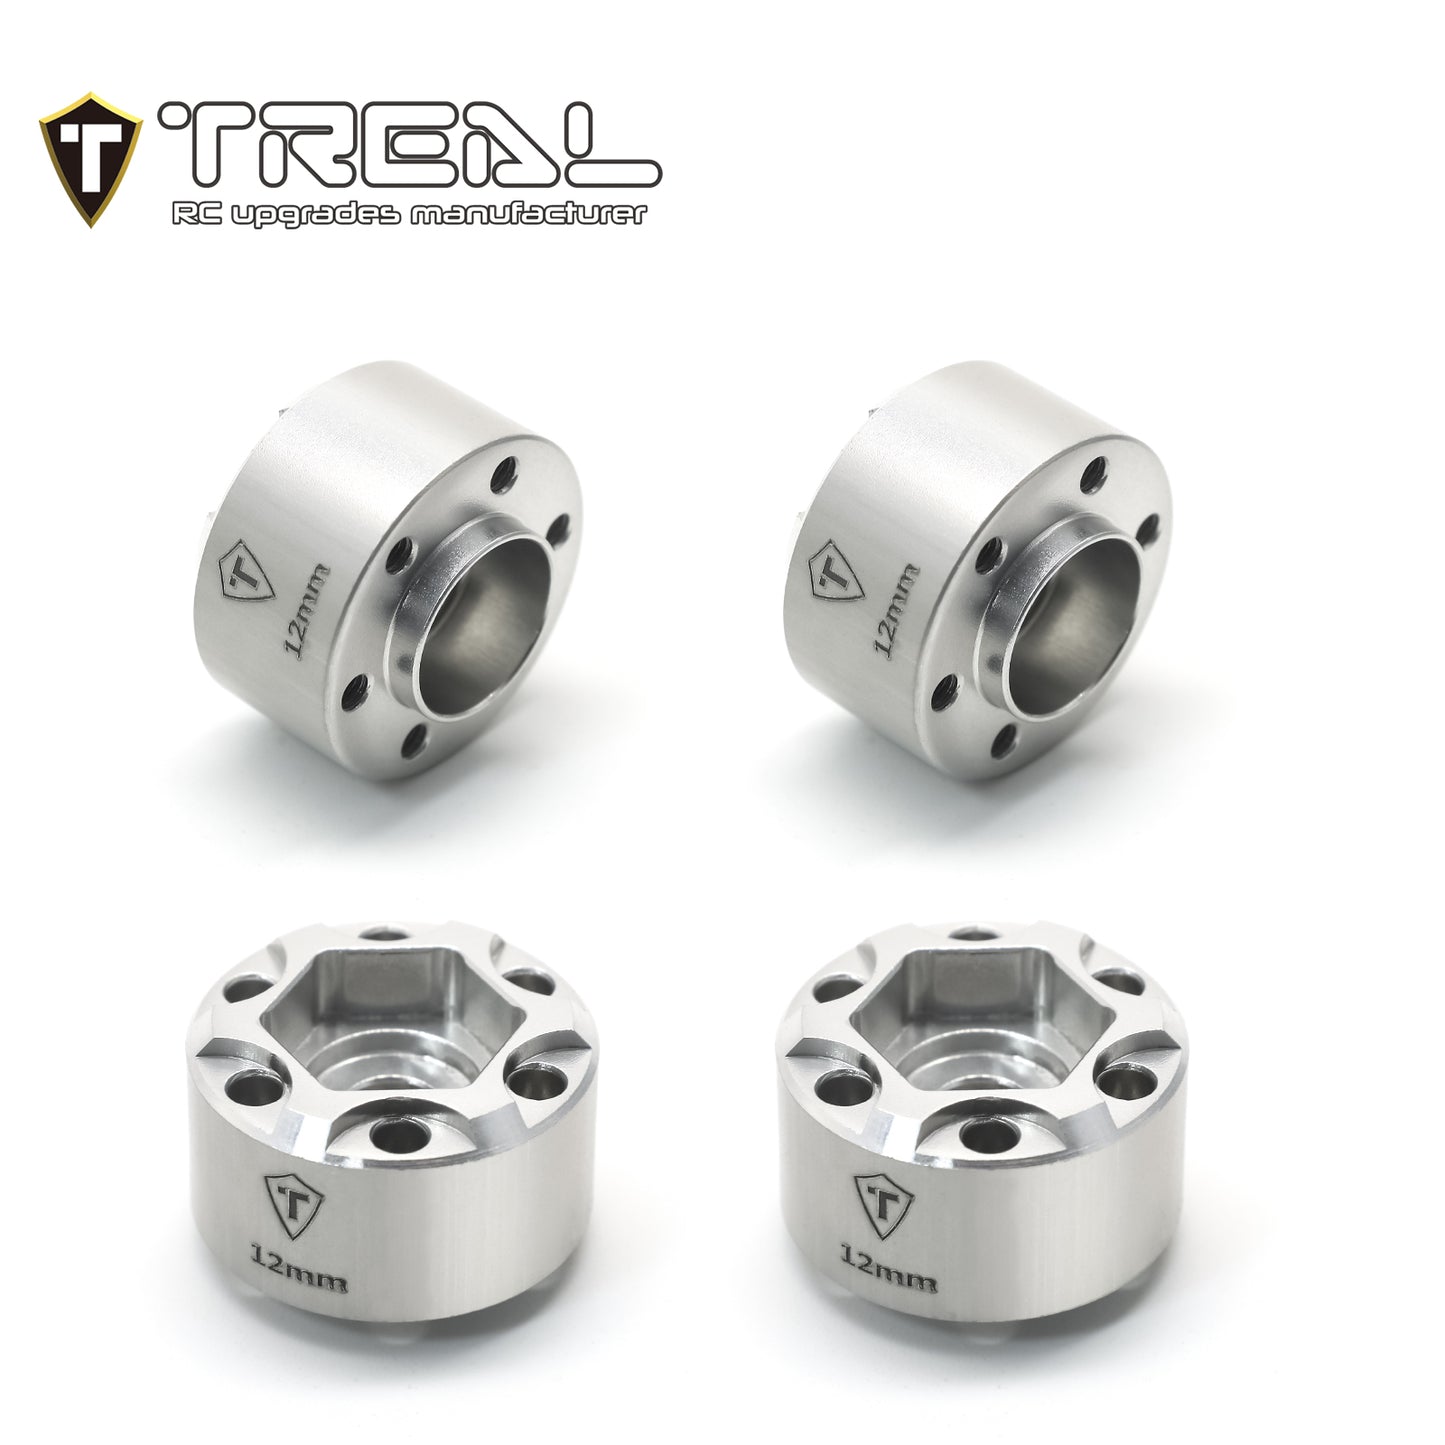 Treal 12mm Hex Hubs 1.9 Wheel Spacer Extension 12mm/15mm/18mm (4p)for 1/10 RC Crawler 1.9 inch Wheel Rim(Silver)